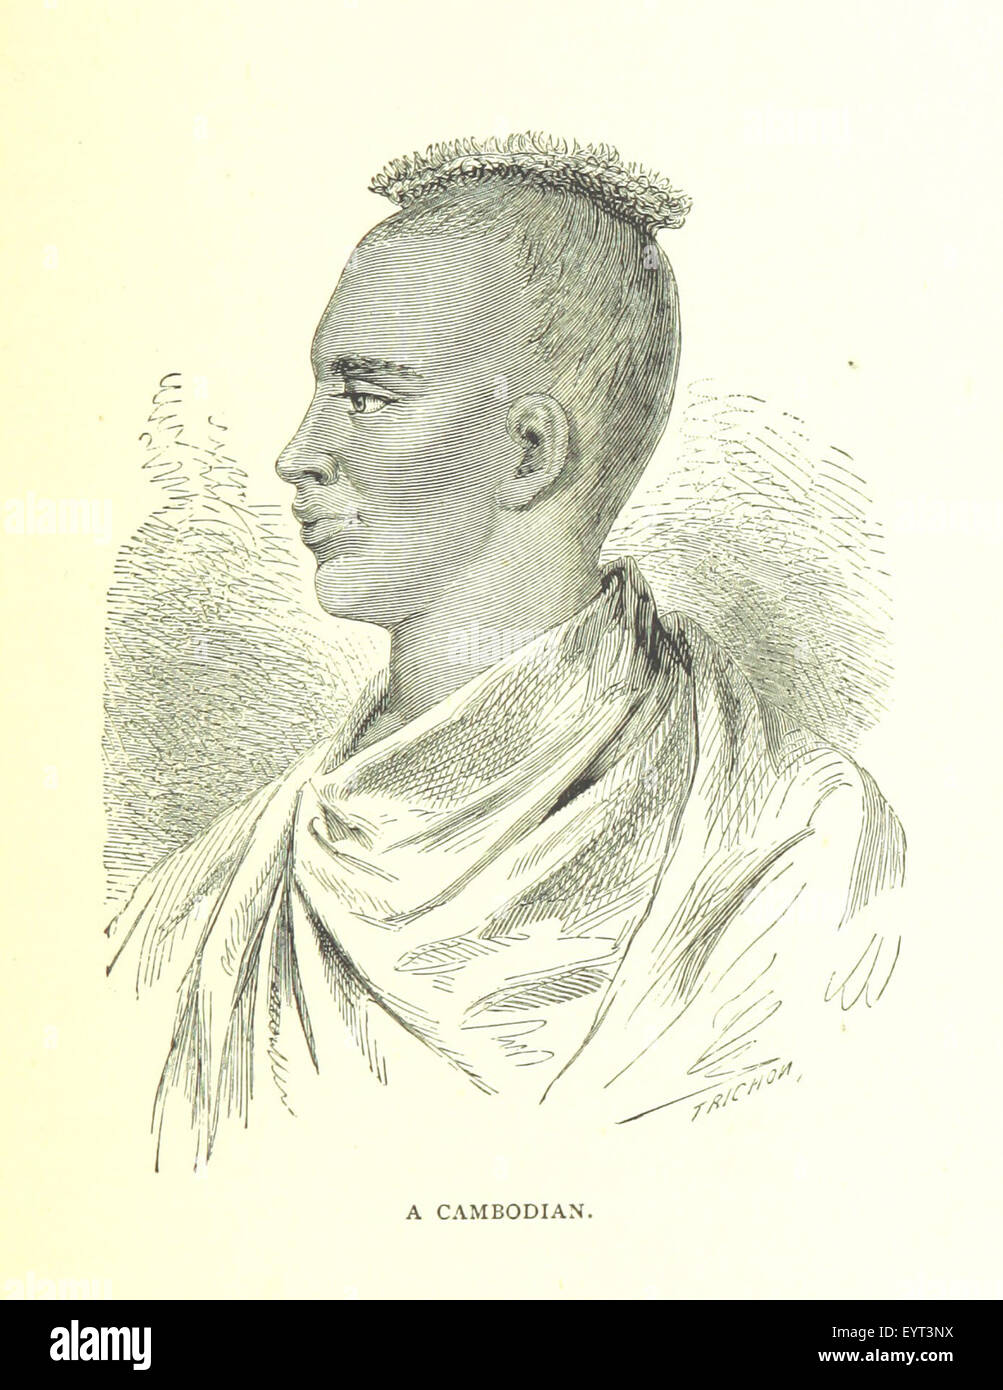 Image taken from page 273 of 'Amongst the Shans ... With ... illustrations, and an historical sketch of the Shans by Holt S. Hallett ... Preceded by an introduction on the cradle of the Shan race by Terrien de Lacouperie' Image taken from page 273 of 'Amongst the Shans Stock Photo